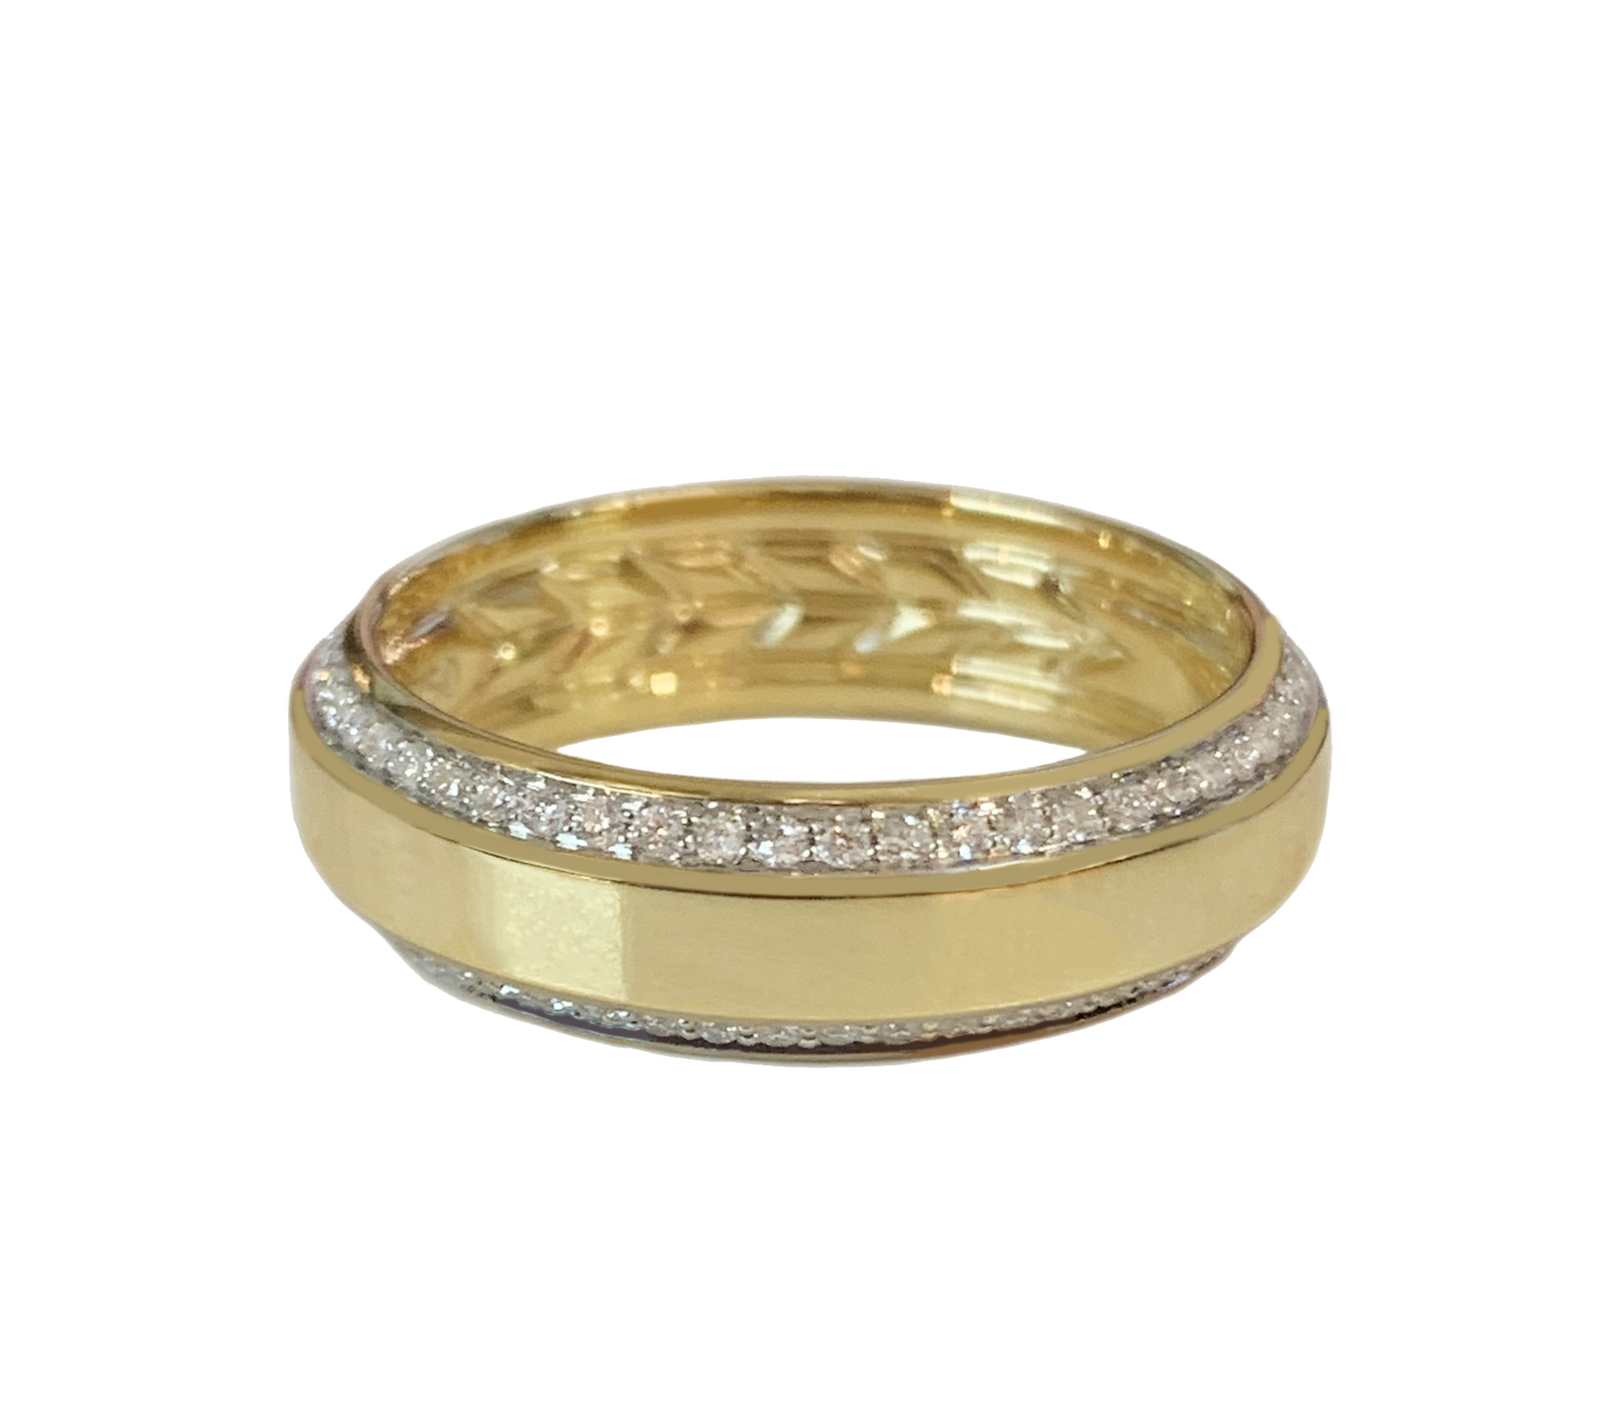 Primary image for David Yurman Beveled Band Ring In 18k Yellow Gold With Pave Diamonds